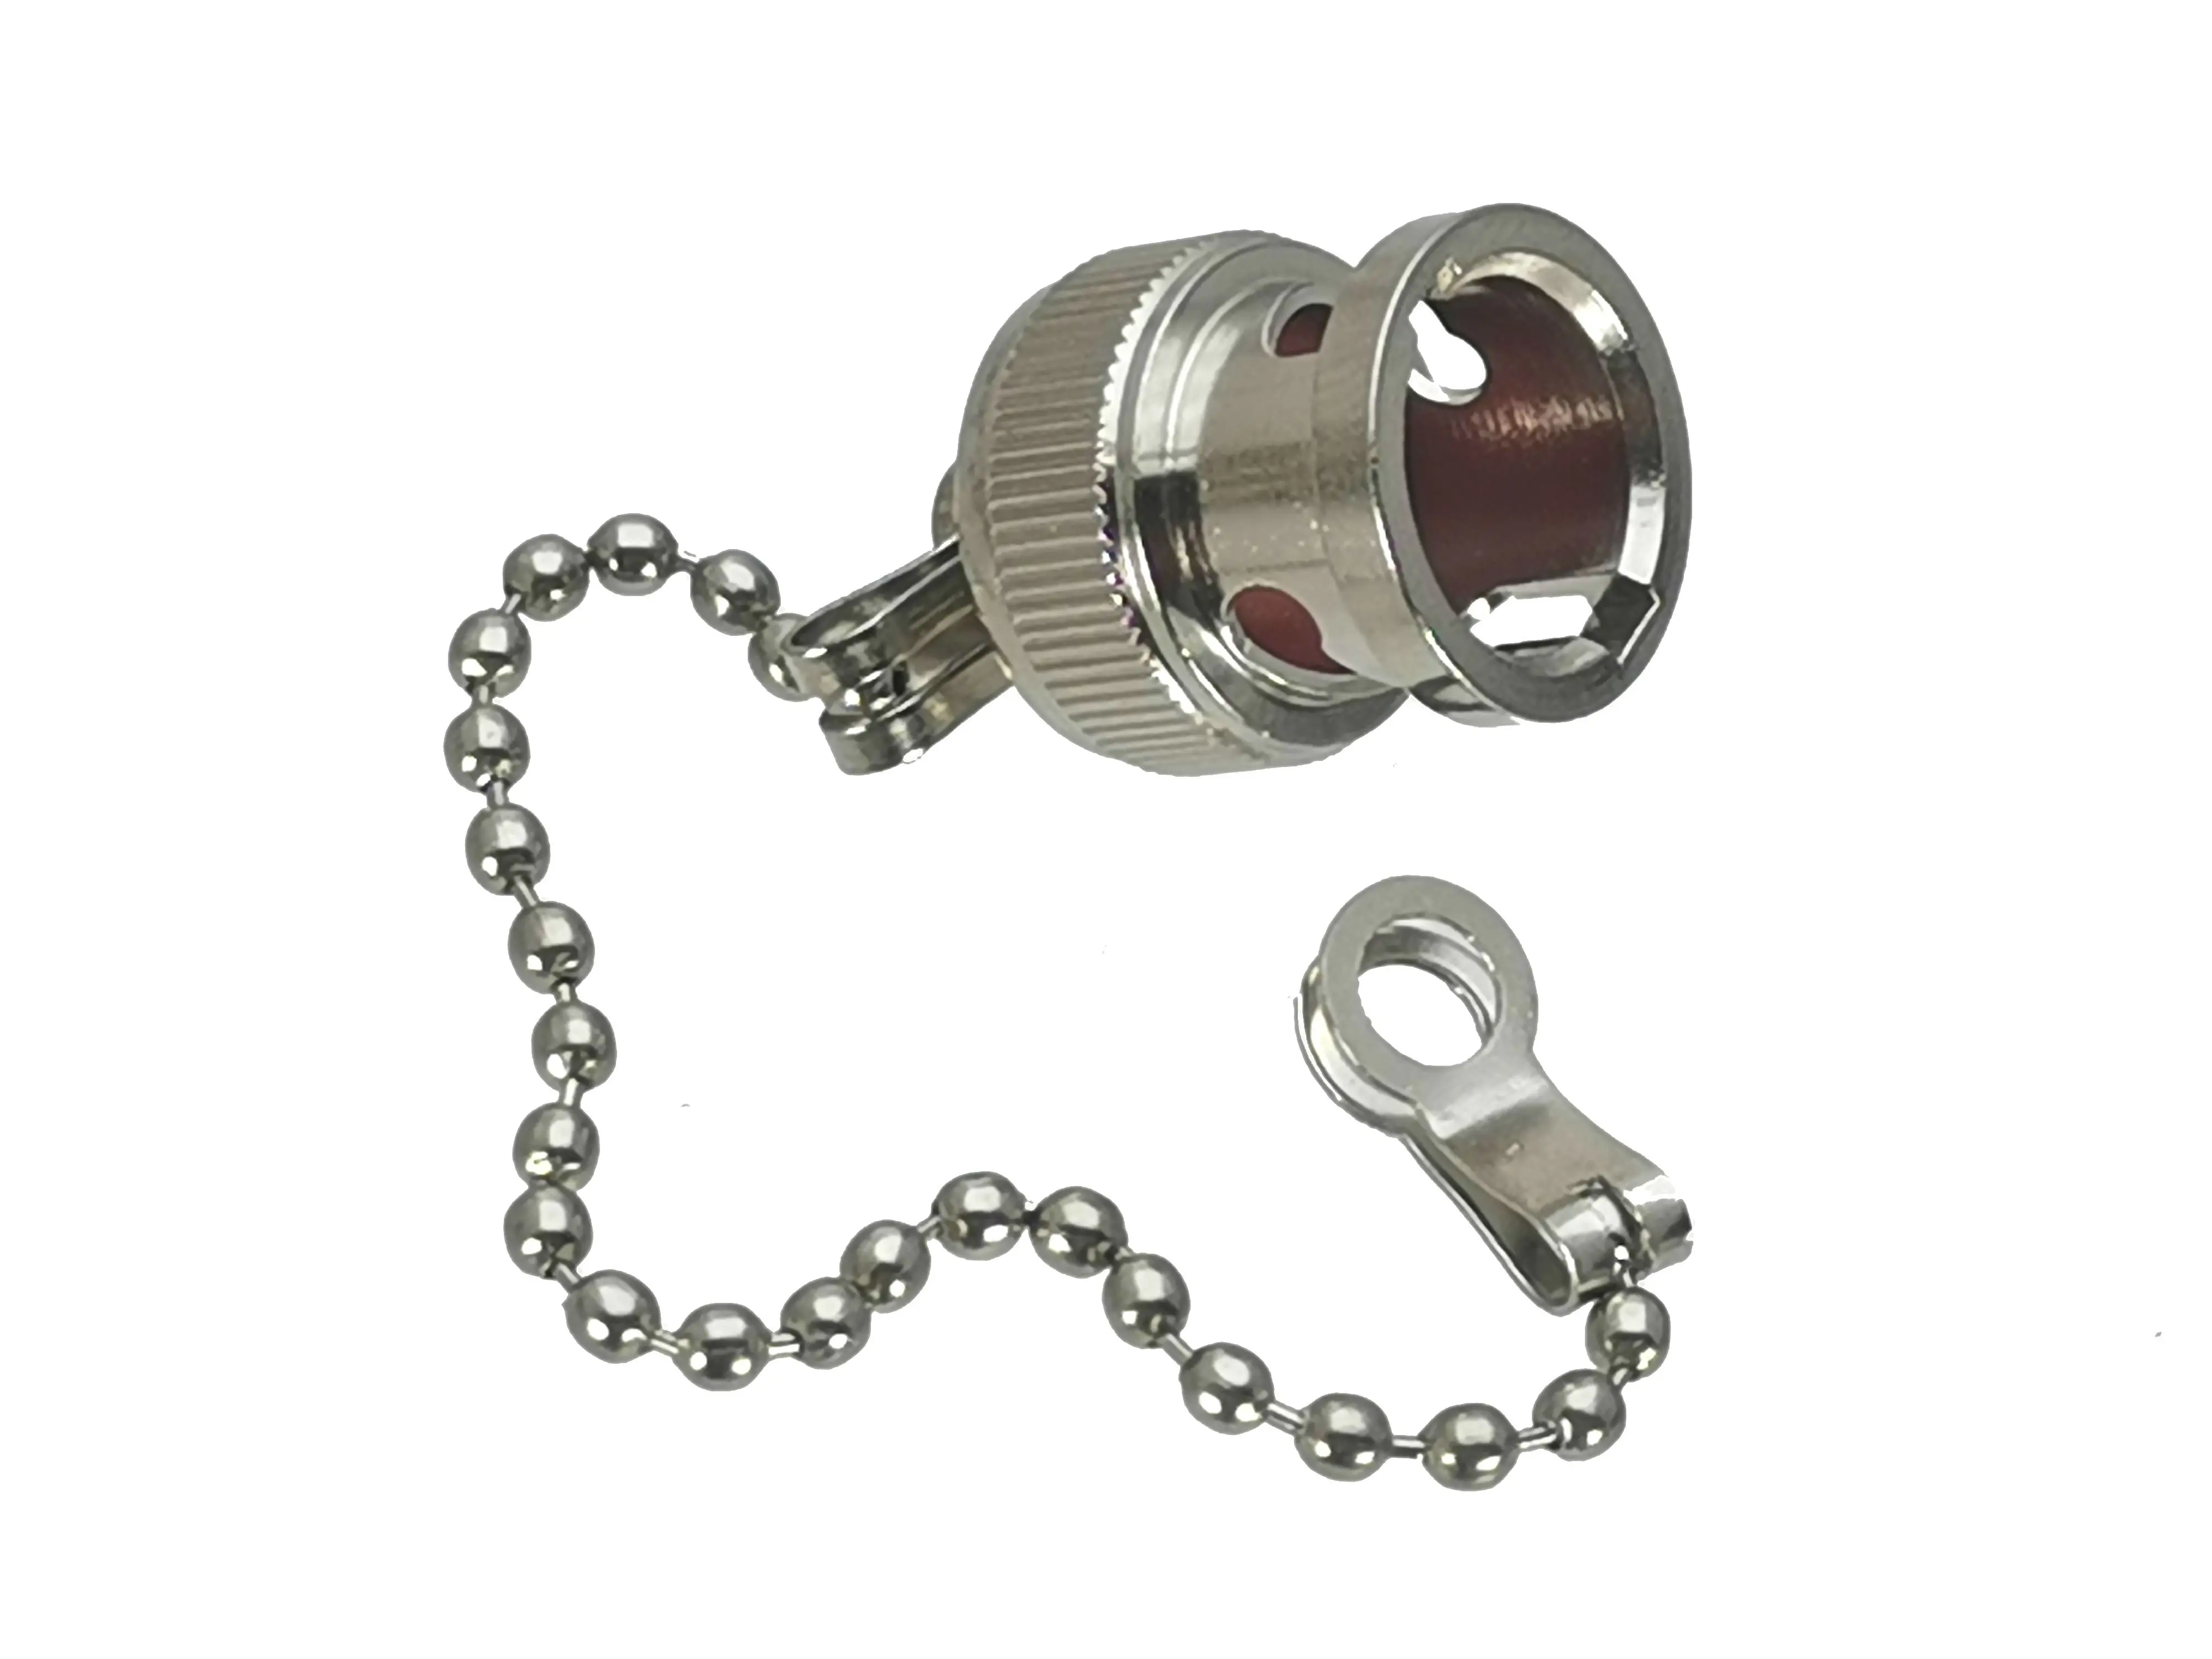 1pce Connector Dust Cap With Chain for UHF Pl259 Plug Pin for sale online 